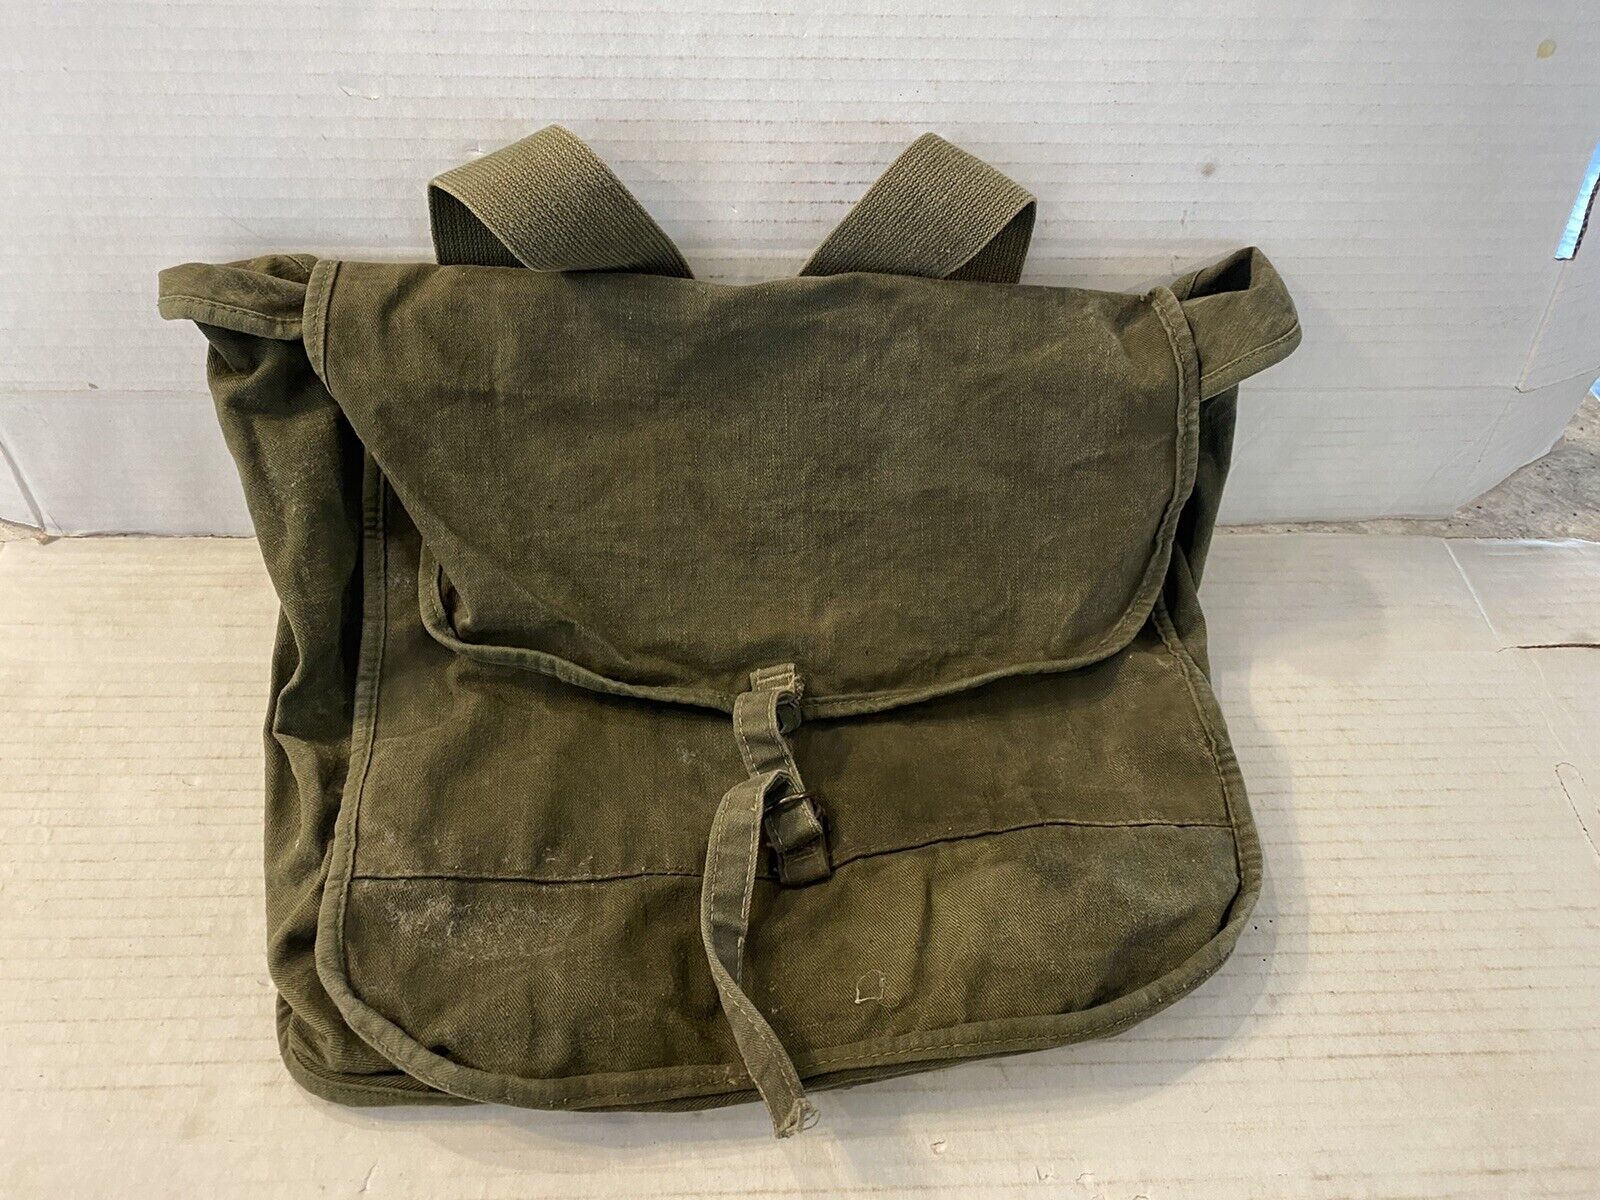 Boy Scouts of America National Council No.1225 Day Hike Bag Canvas  Green Bx15